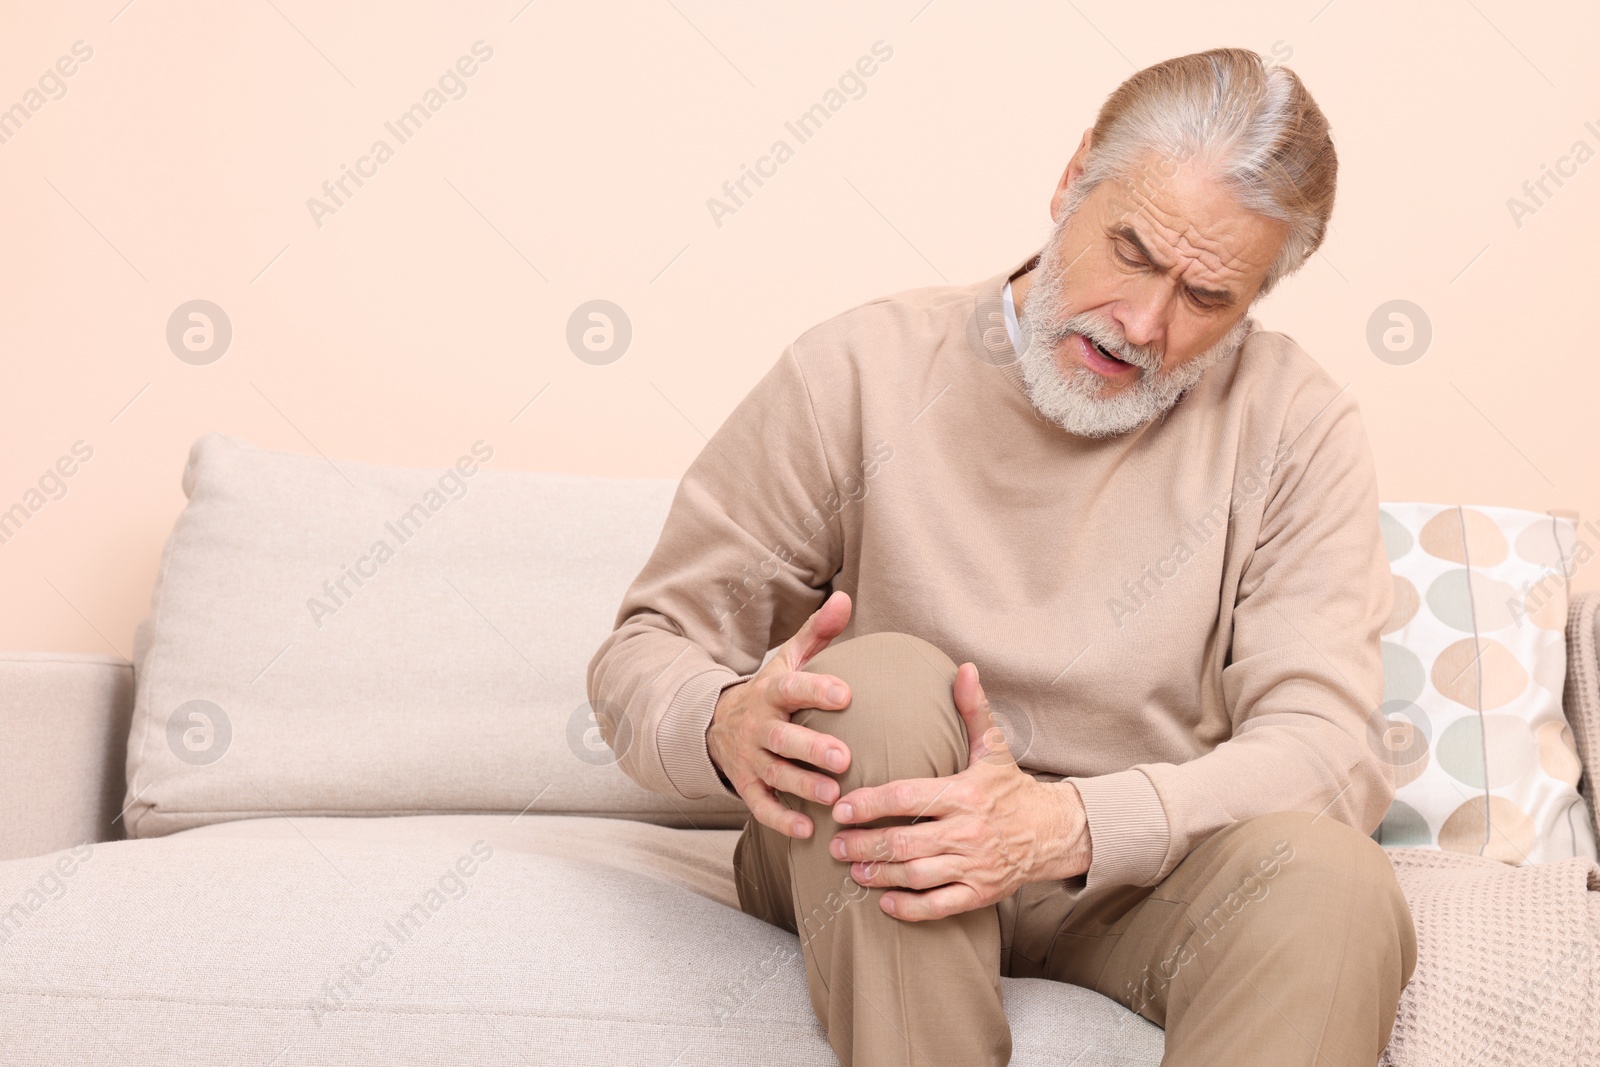 Photo of Senior man suffering from pain in his knee at home, space for text. Arthritis symptoms